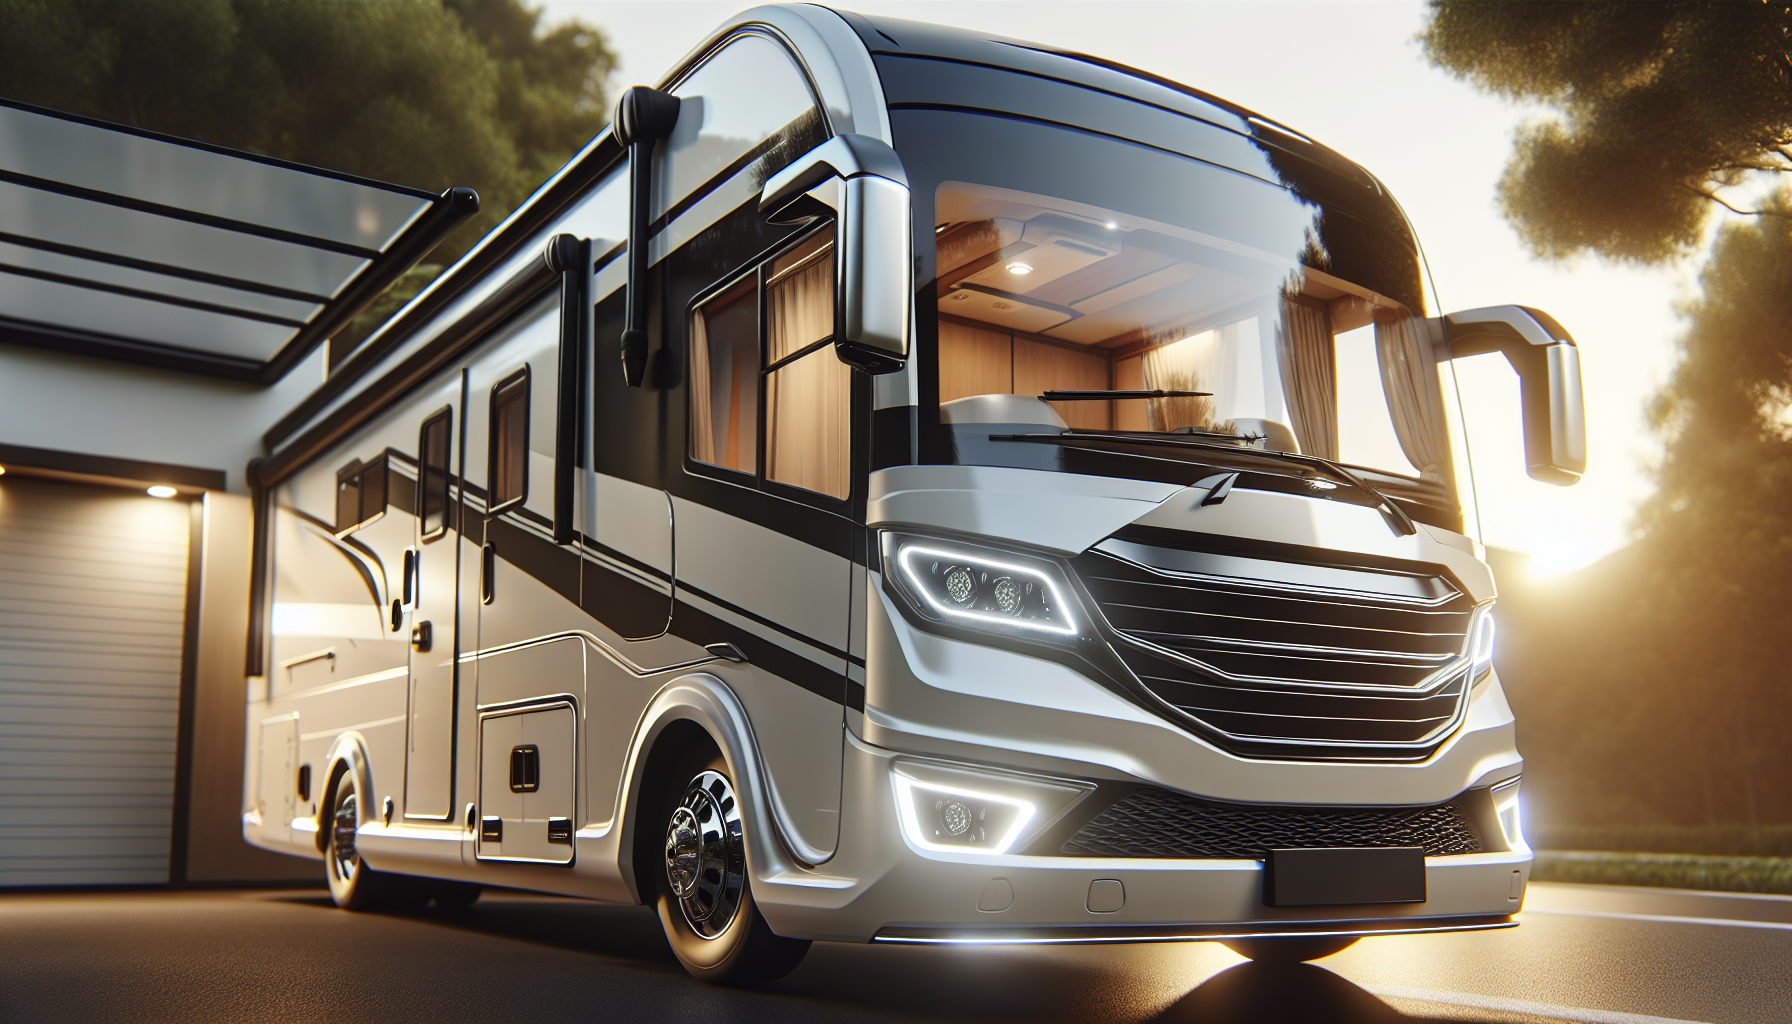 A Comprehensive Look at the Winnebago Spirit 31H: Exterior and Interior Features